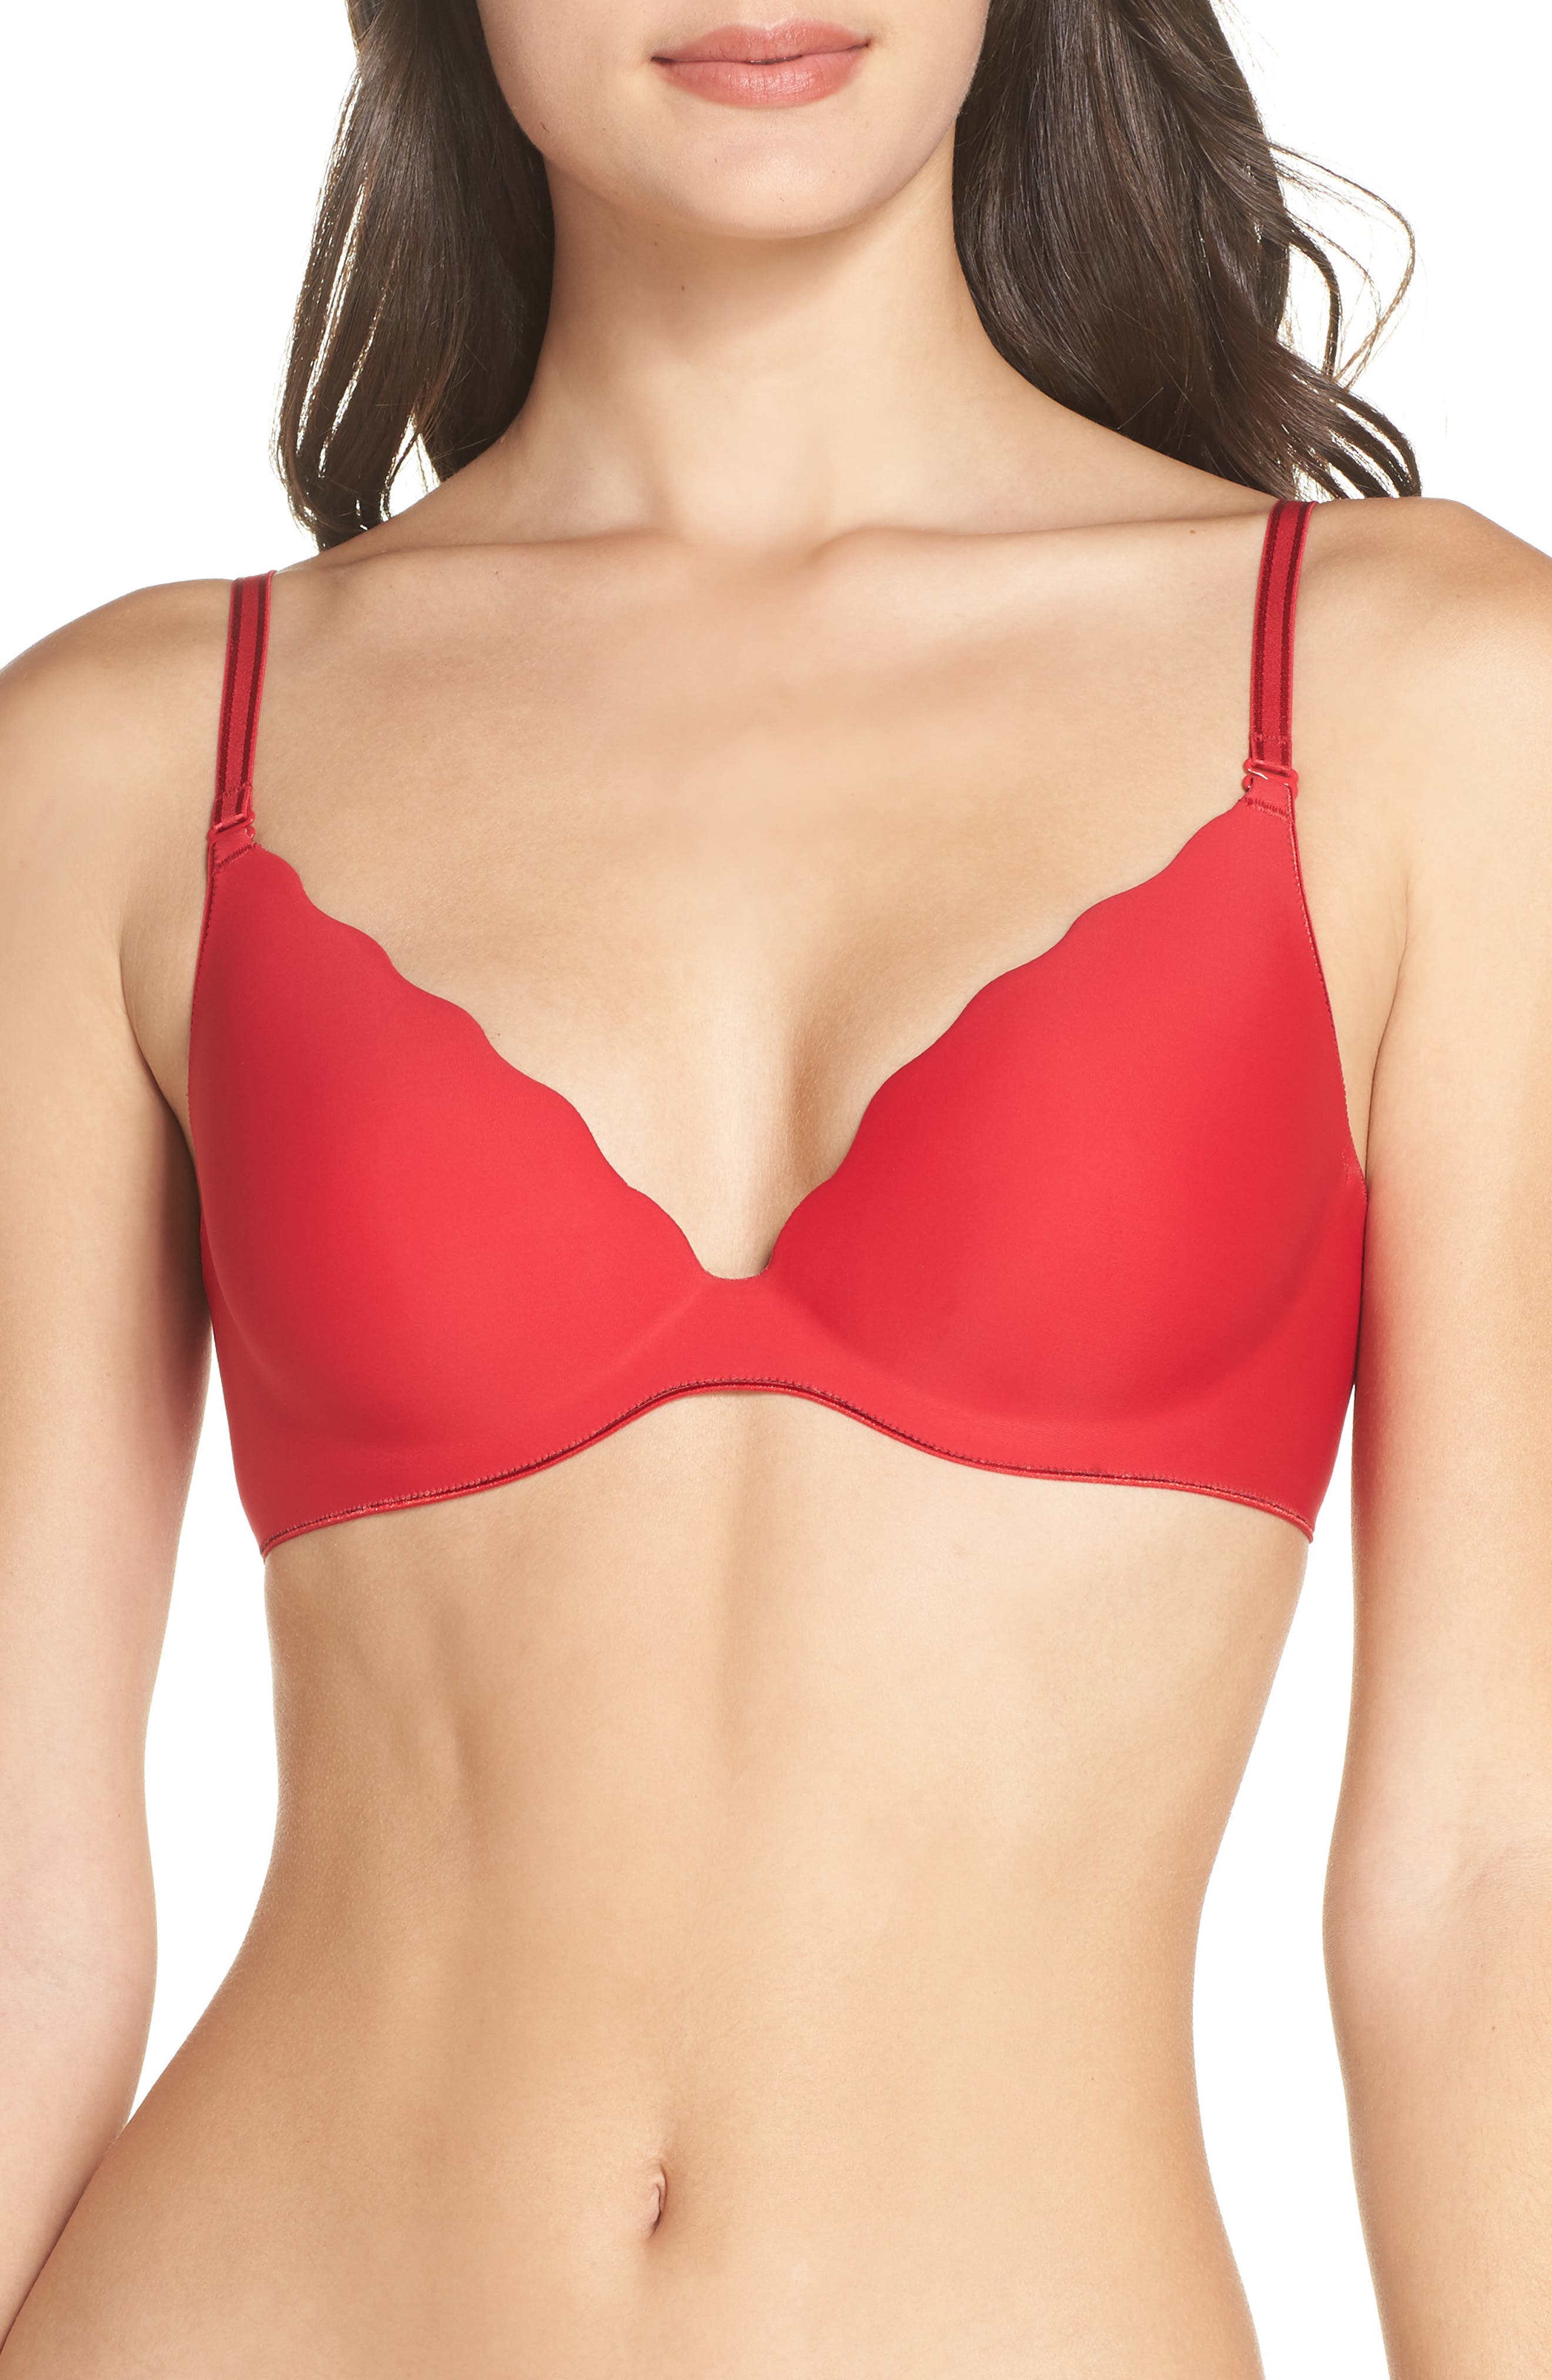 UPC 719544763394 product image for Women's B.tempt'D By Wacoal 'B Wowed' Convertible Push-Up Bra, Size 34B - Red | upcitemdb.com